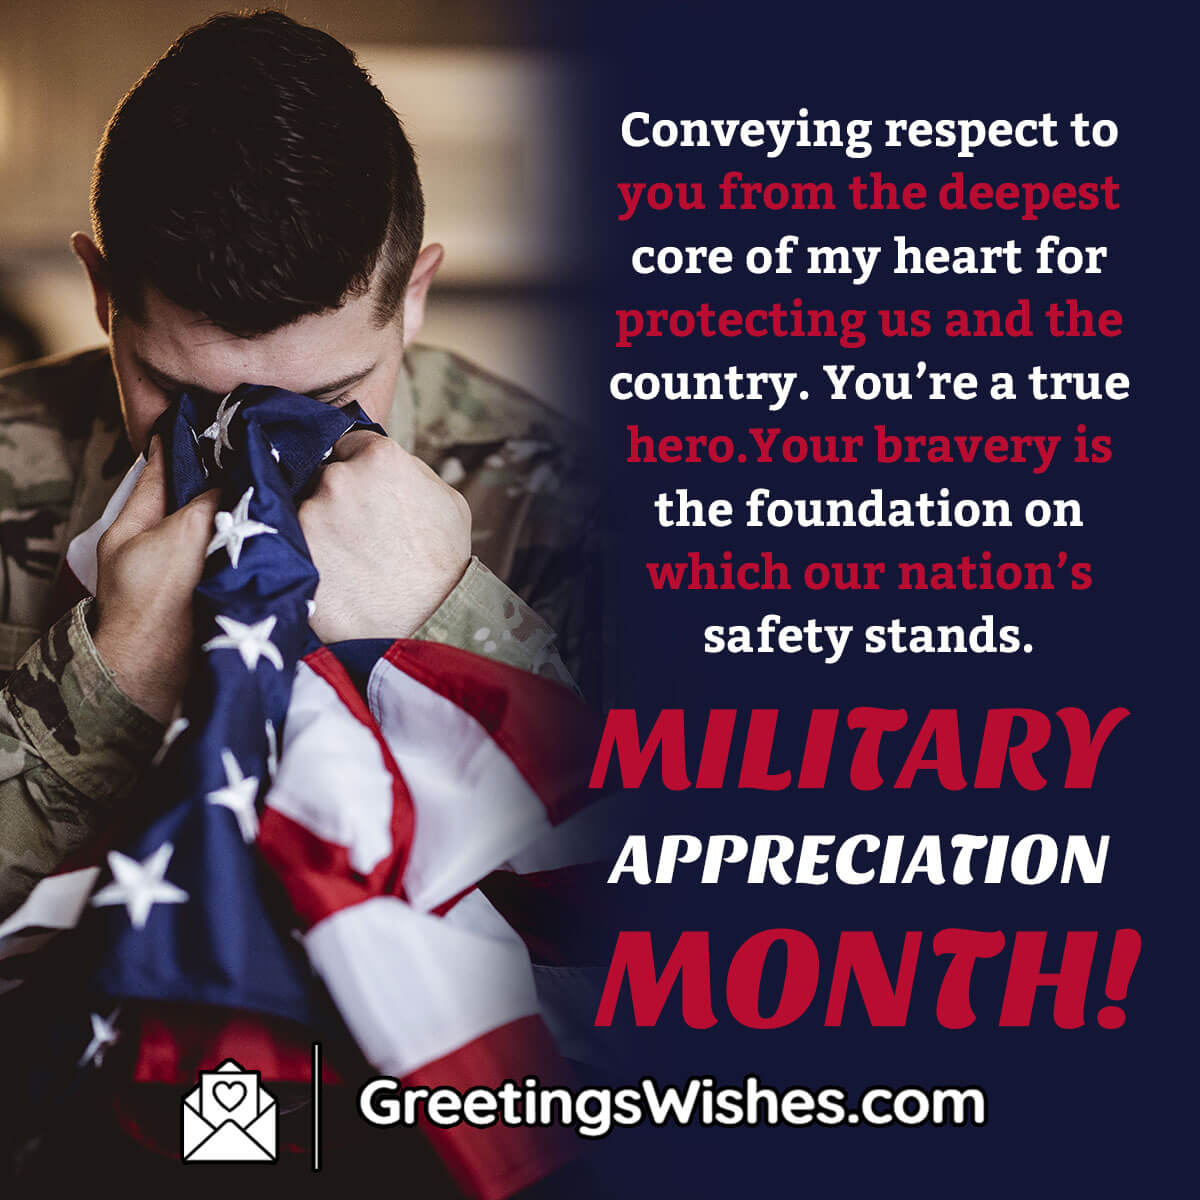 Military Appreciation Month Message